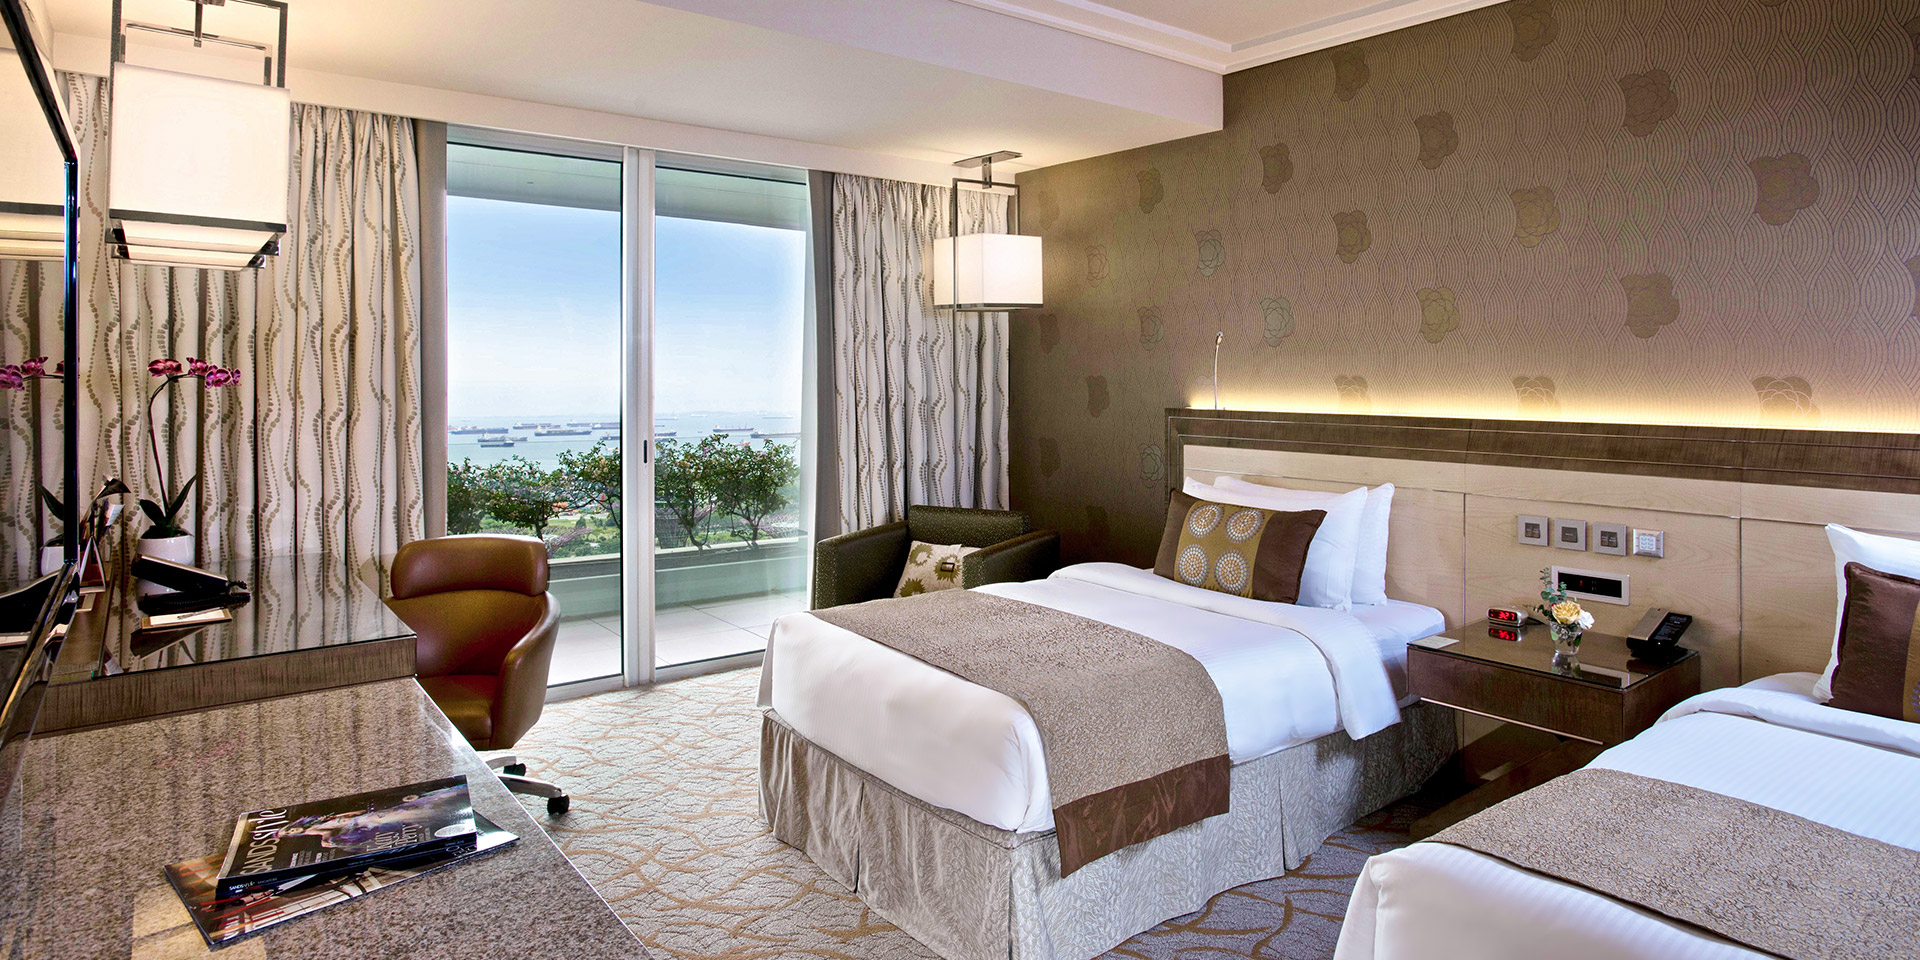 Deluxe Room at Marina Bay Sands with Twin Beds and Garden View